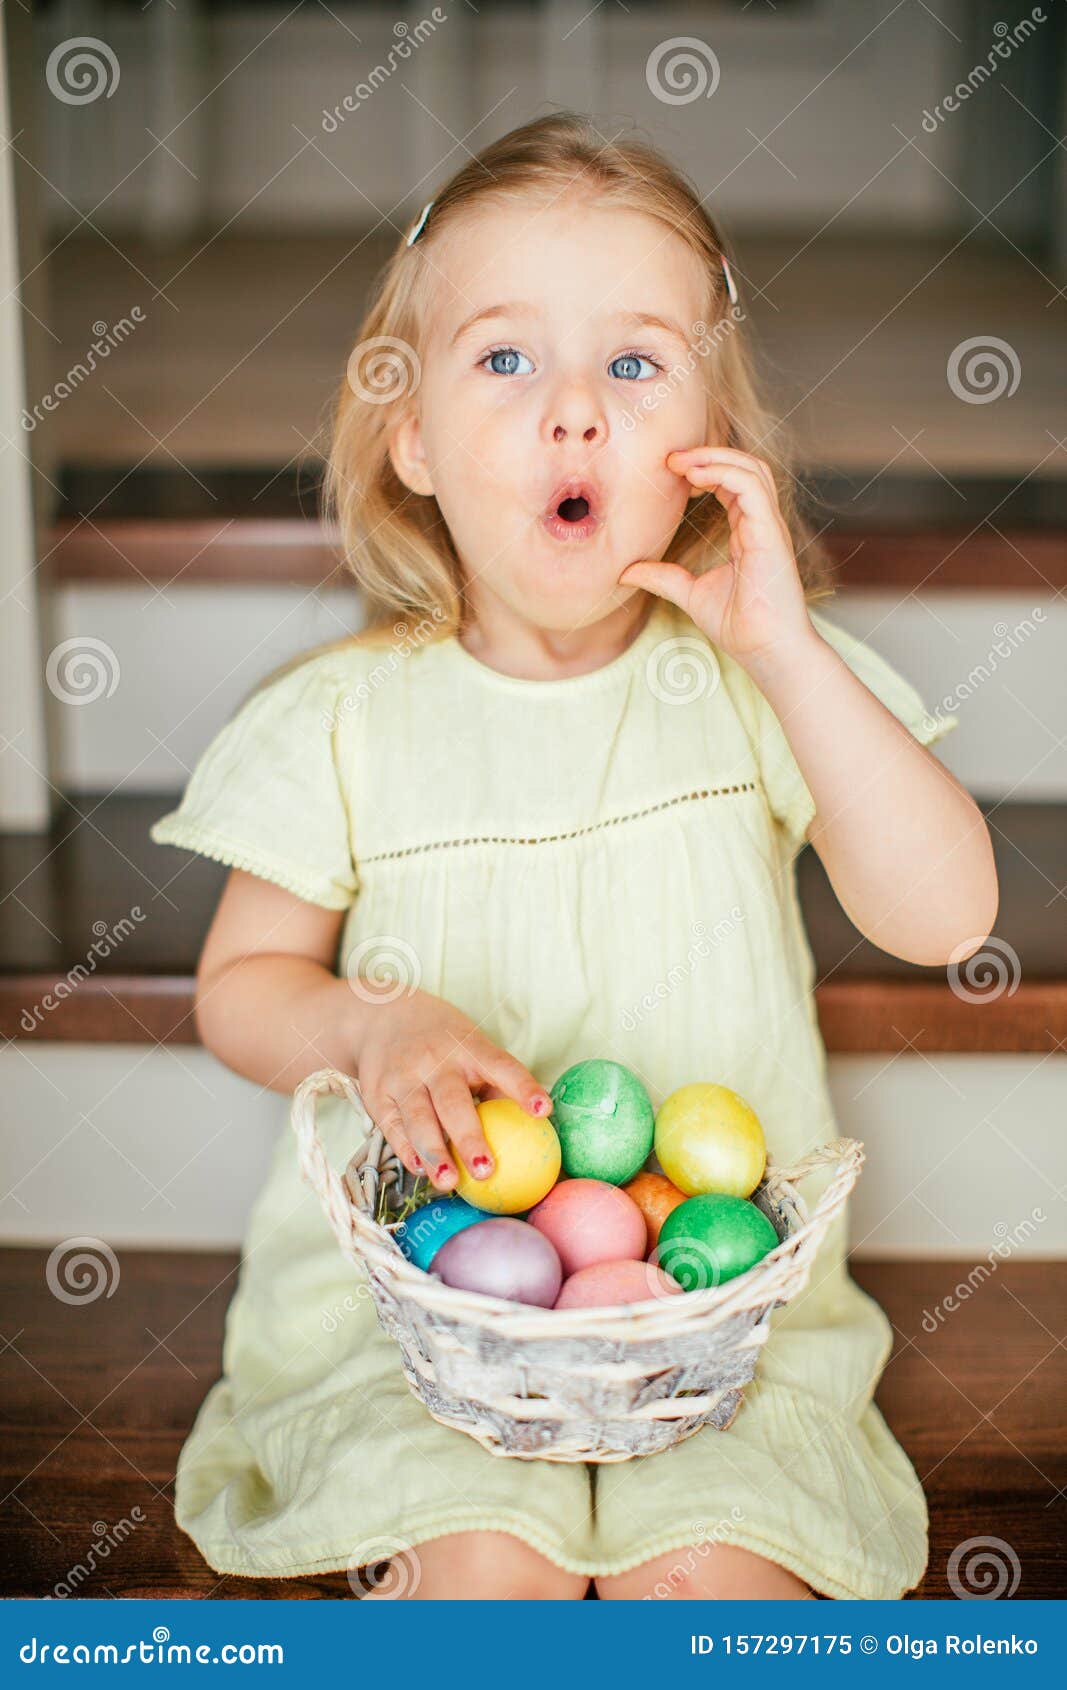 Cute Little Child Girl With Blonde Hair On Easter Day Girl Holding Basket With Painted Eggs And Sitting On The Stairs At Home Stock Image Image Of Easter Home 157297175